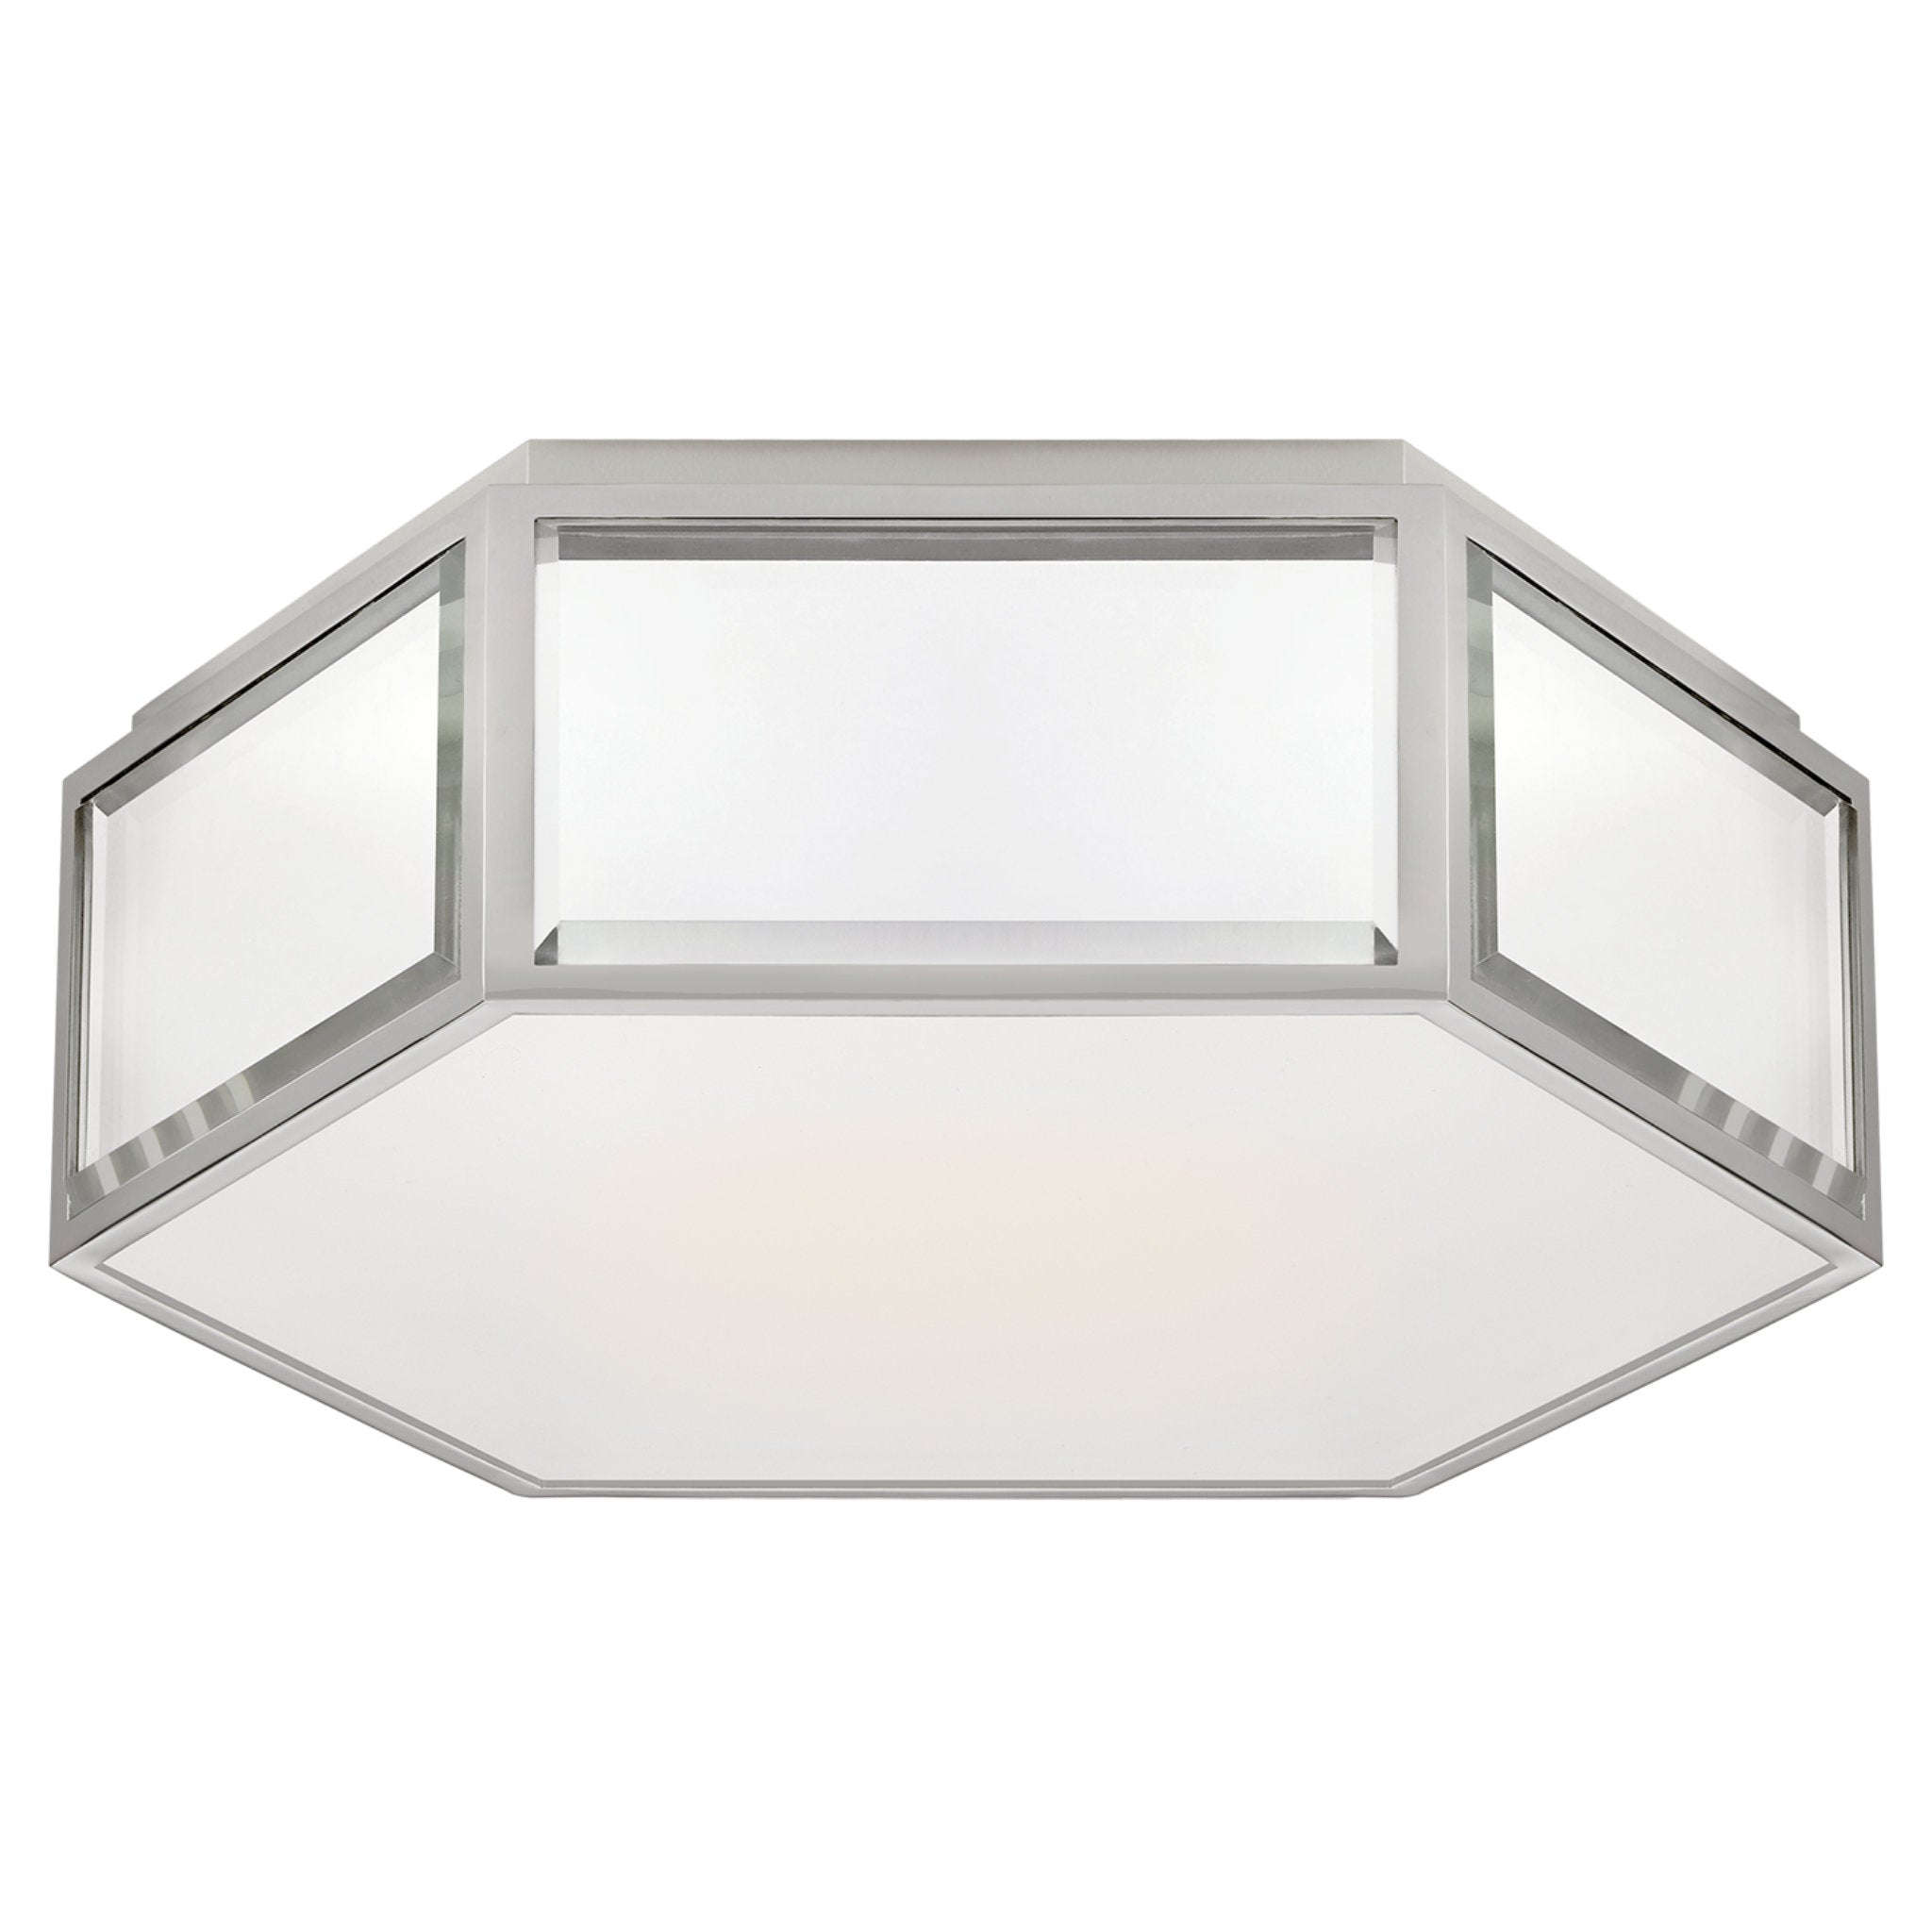 kate spade new york Bradford Small Hexagonal Flush Mount in Mirror and Polished Nickel with Frosted Glass